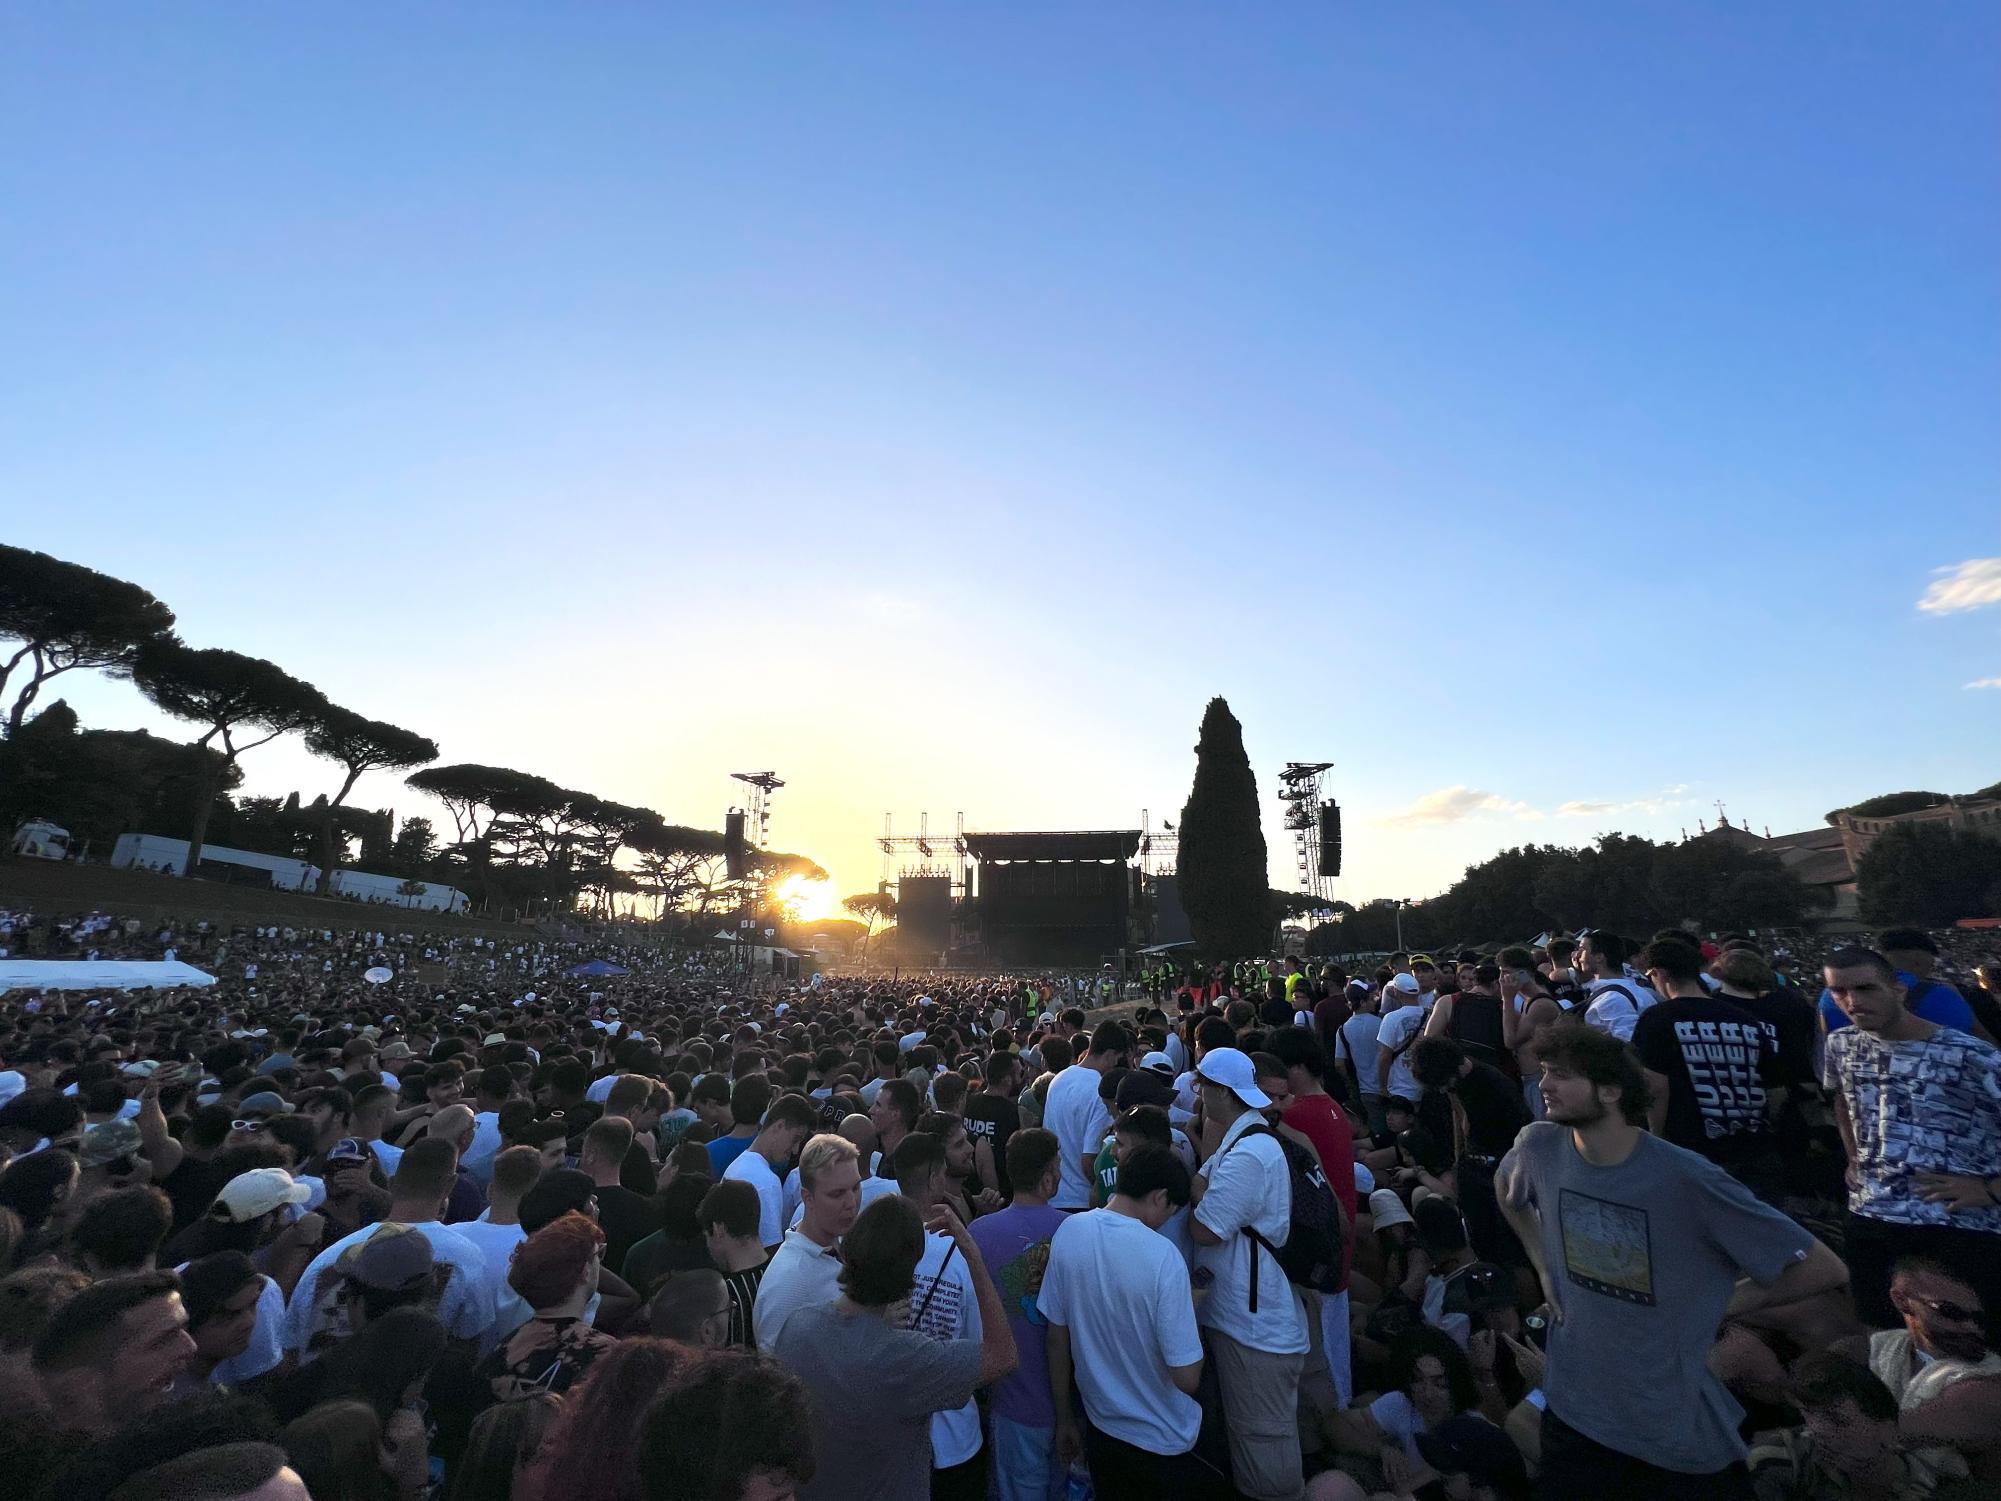 A vast crowd gathered to watch Travis Scott perform at Circus Maximus in Rome on Aug. 7, 2023.